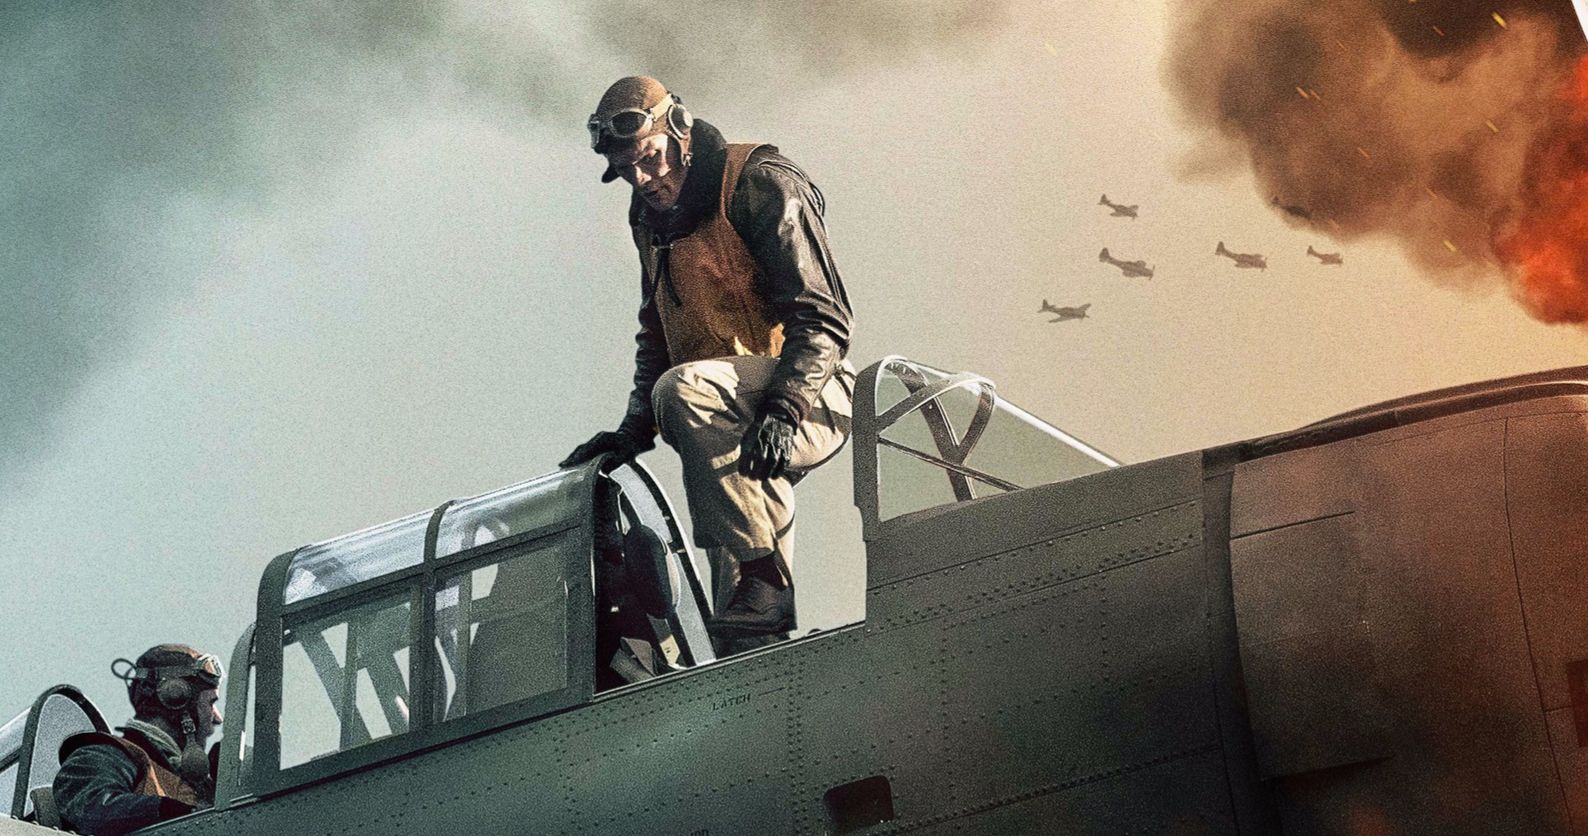 Midway Trailer: Independence Day Director Takes on World War II